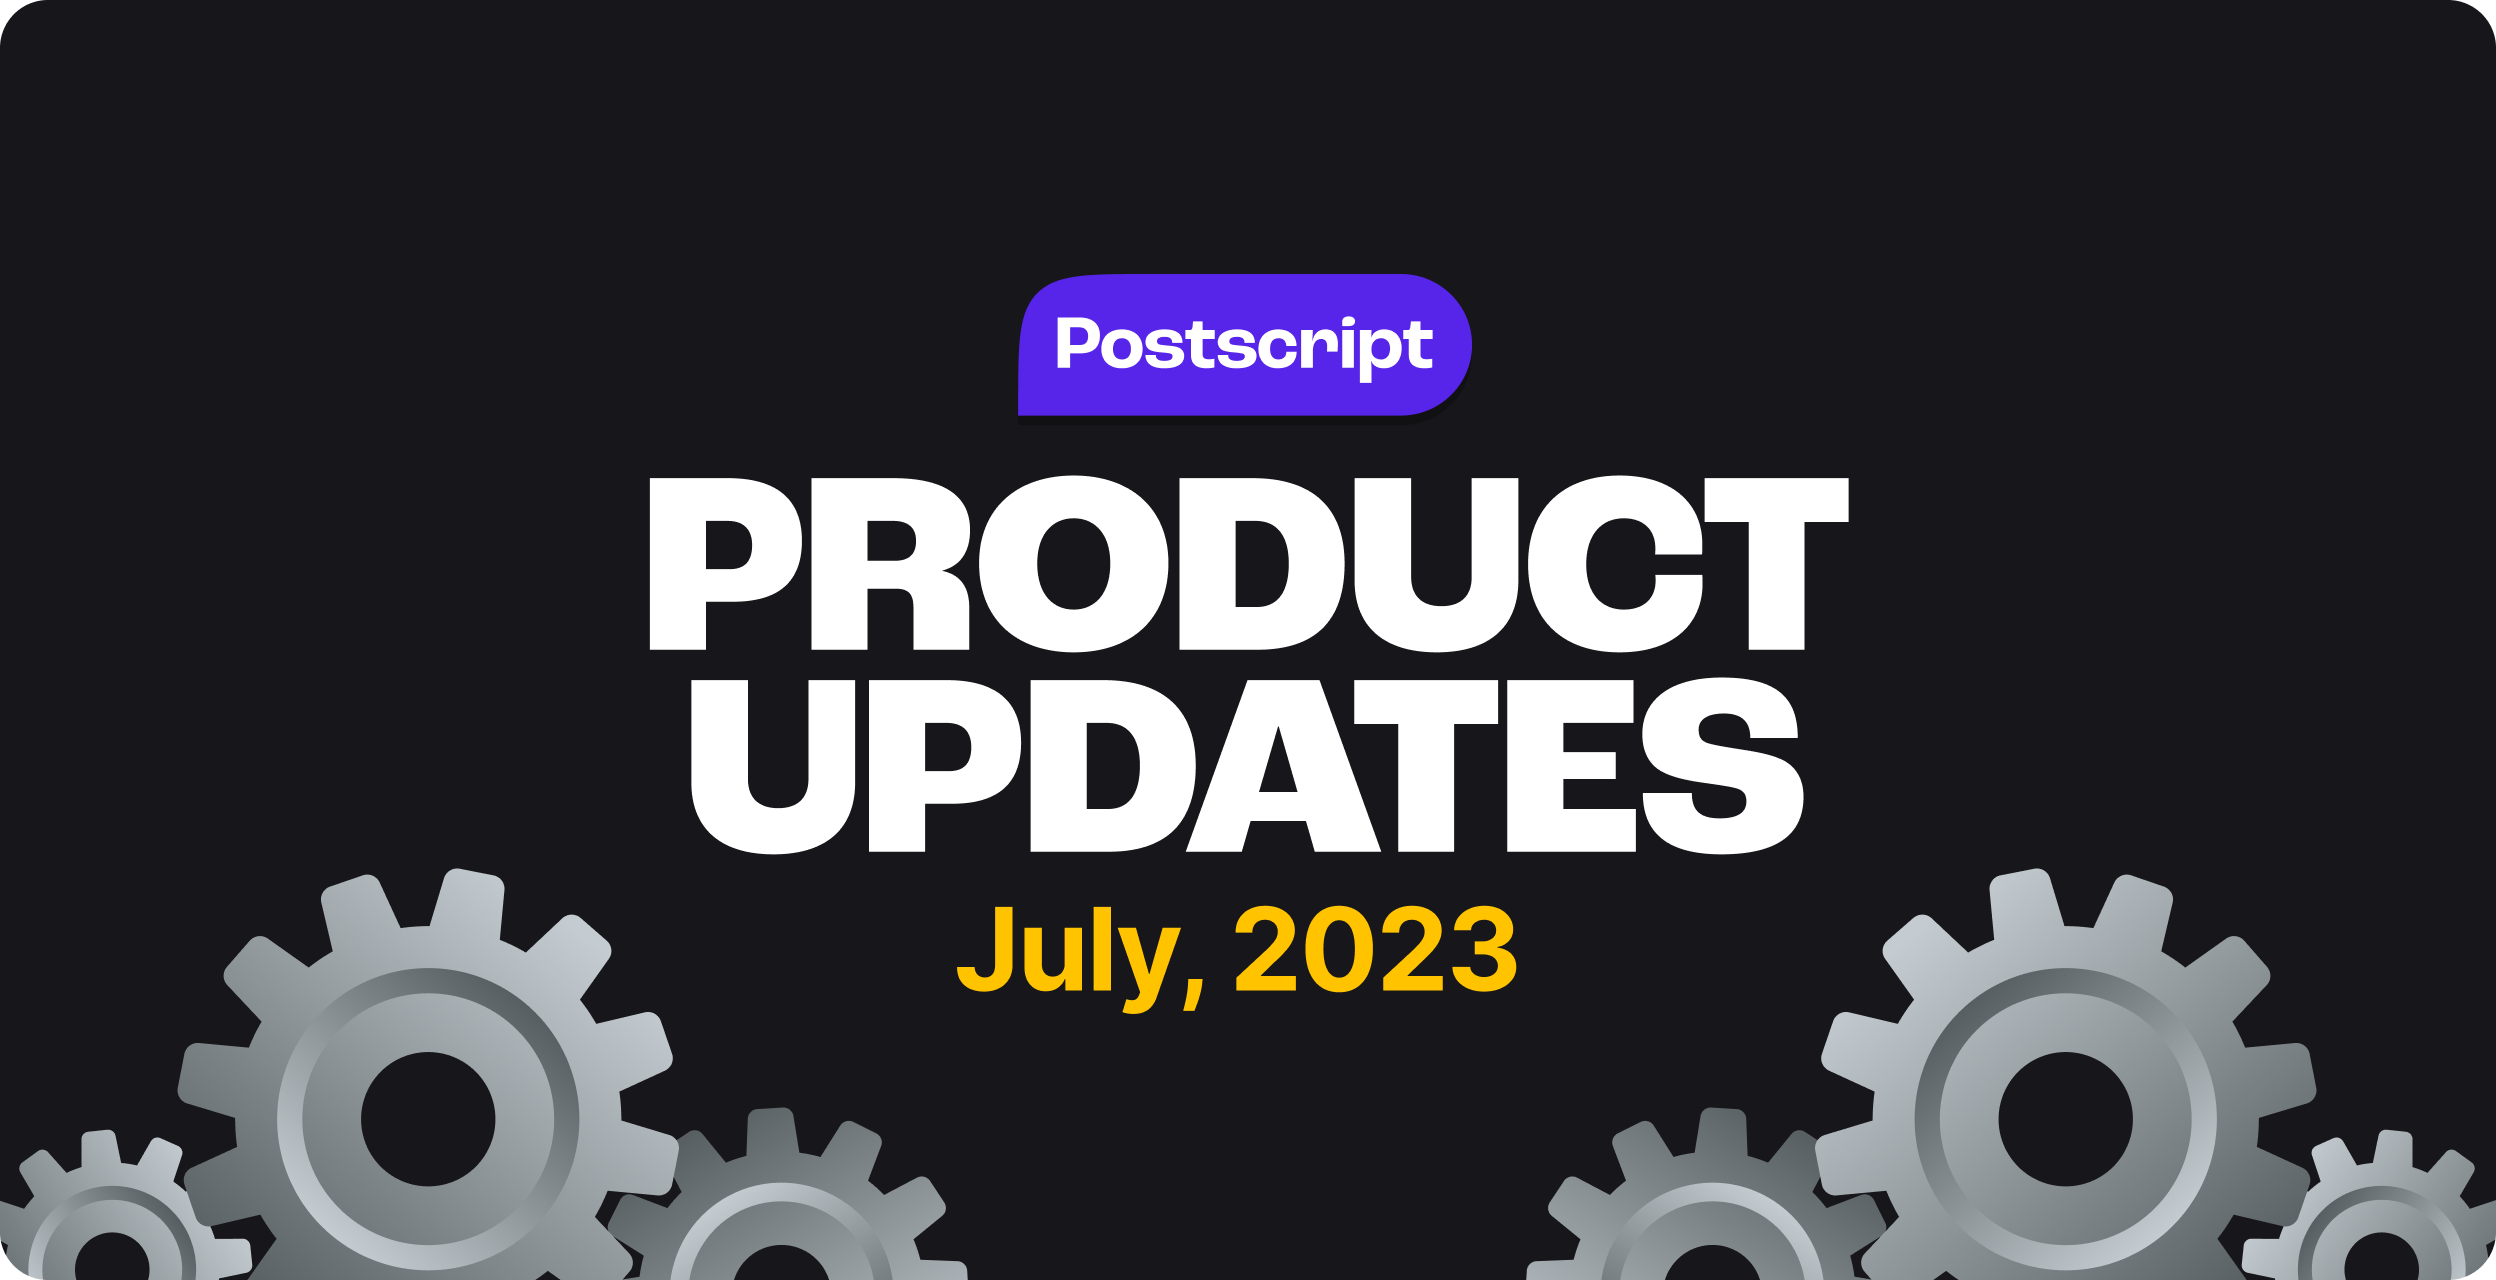 What’s New in Postscript: July 2023 Product Updates